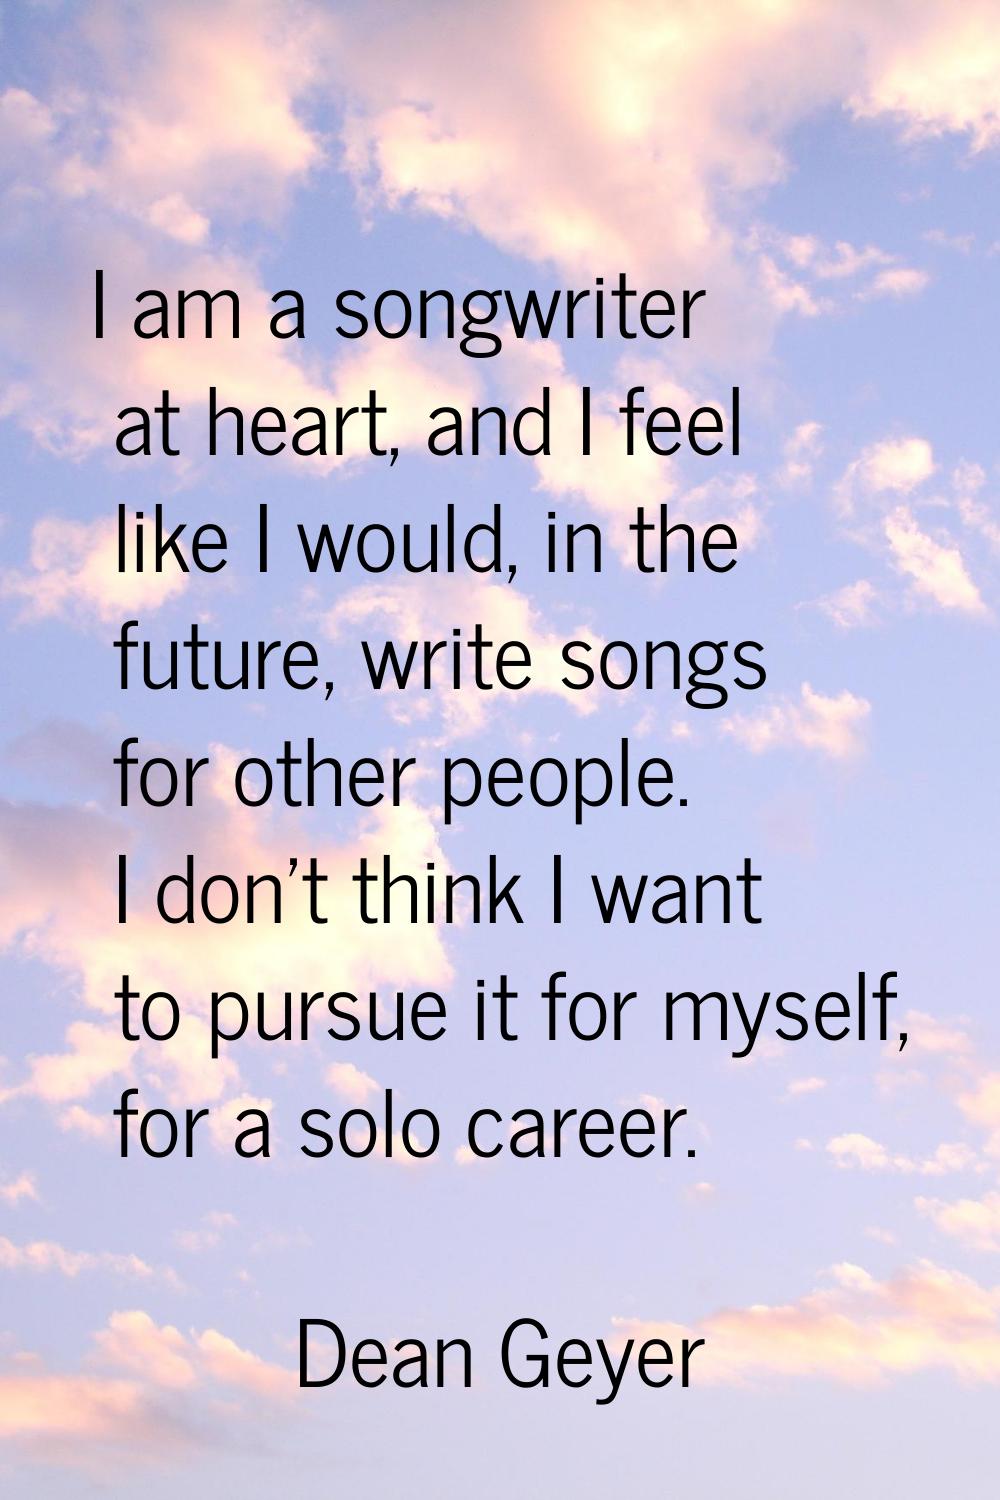 I am a songwriter at heart, and I feel like I would, in the future, write songs for other people. I